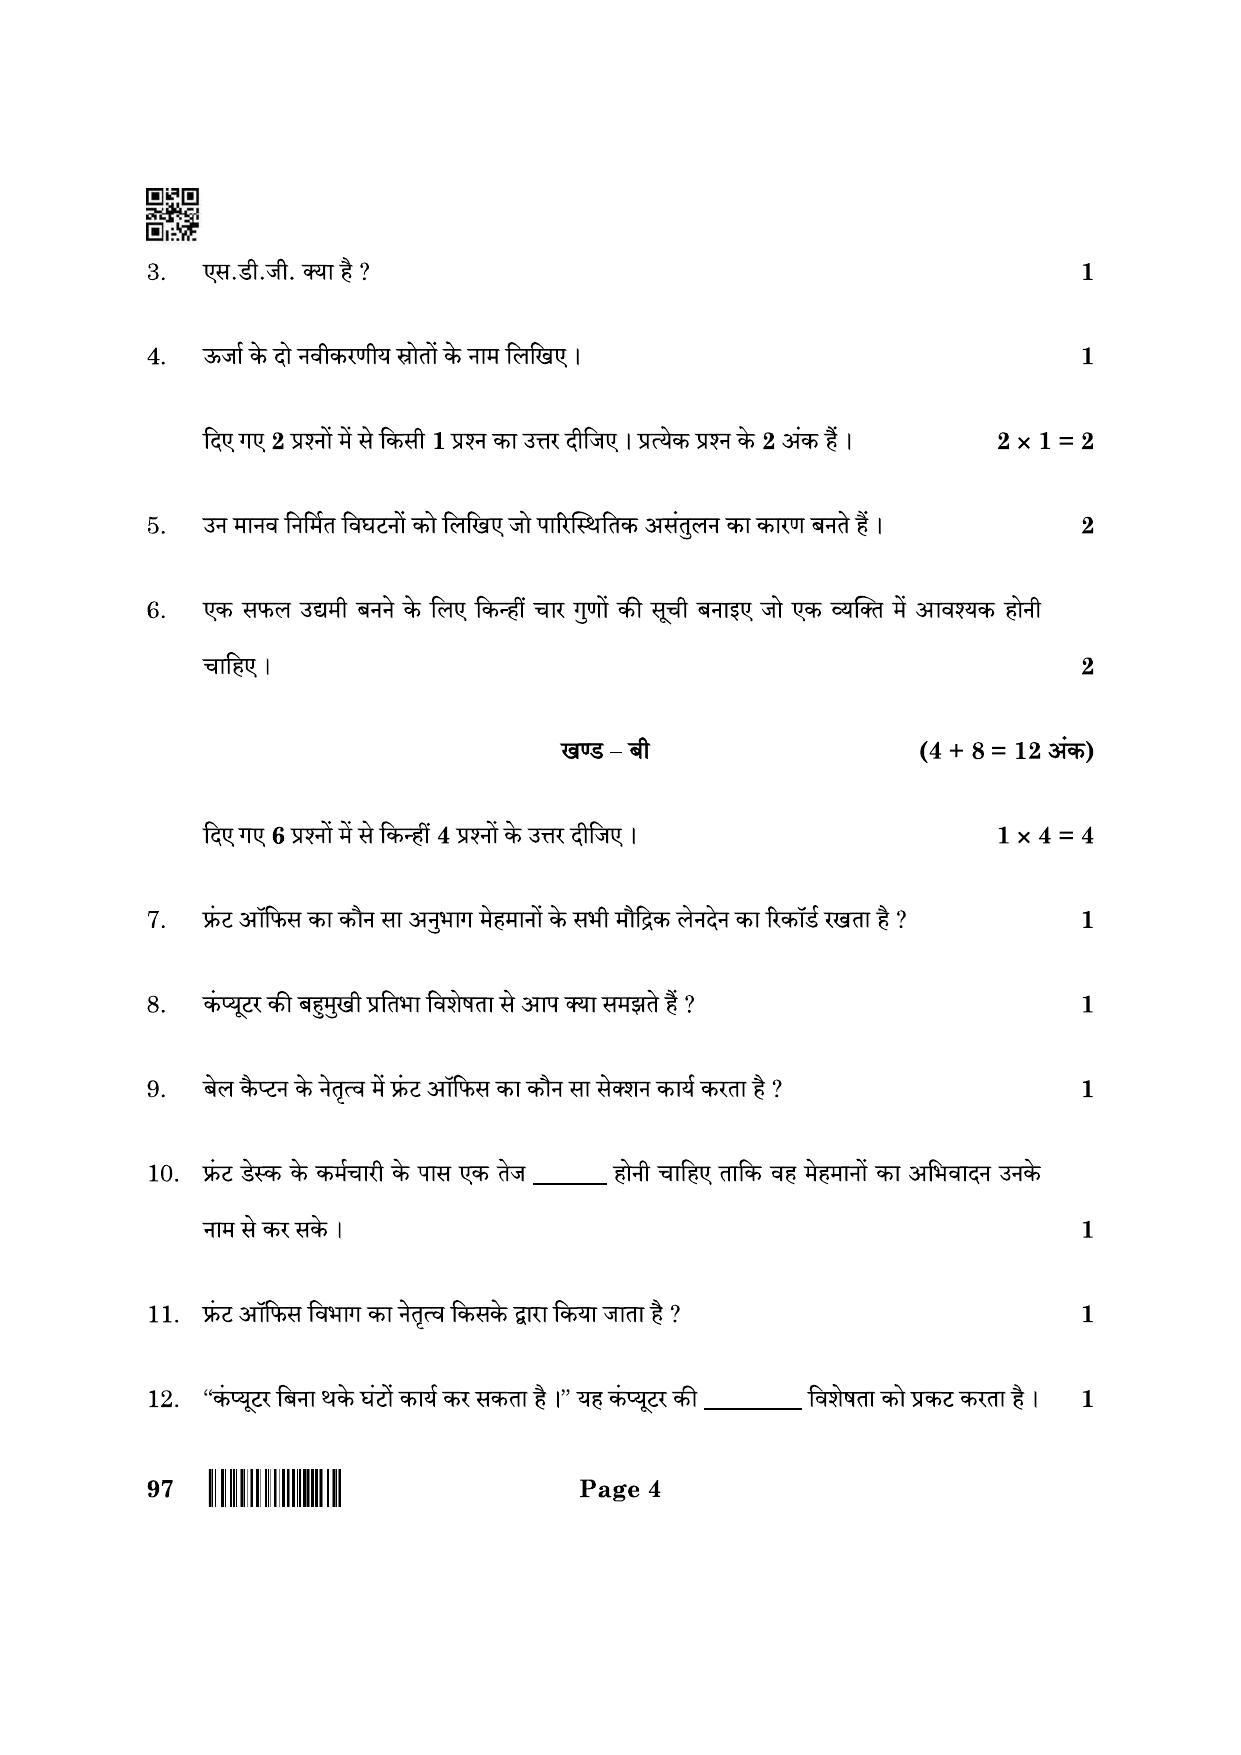 CBSE Class 10 97 Front Office Operations 2022 Question Paper - Page 4